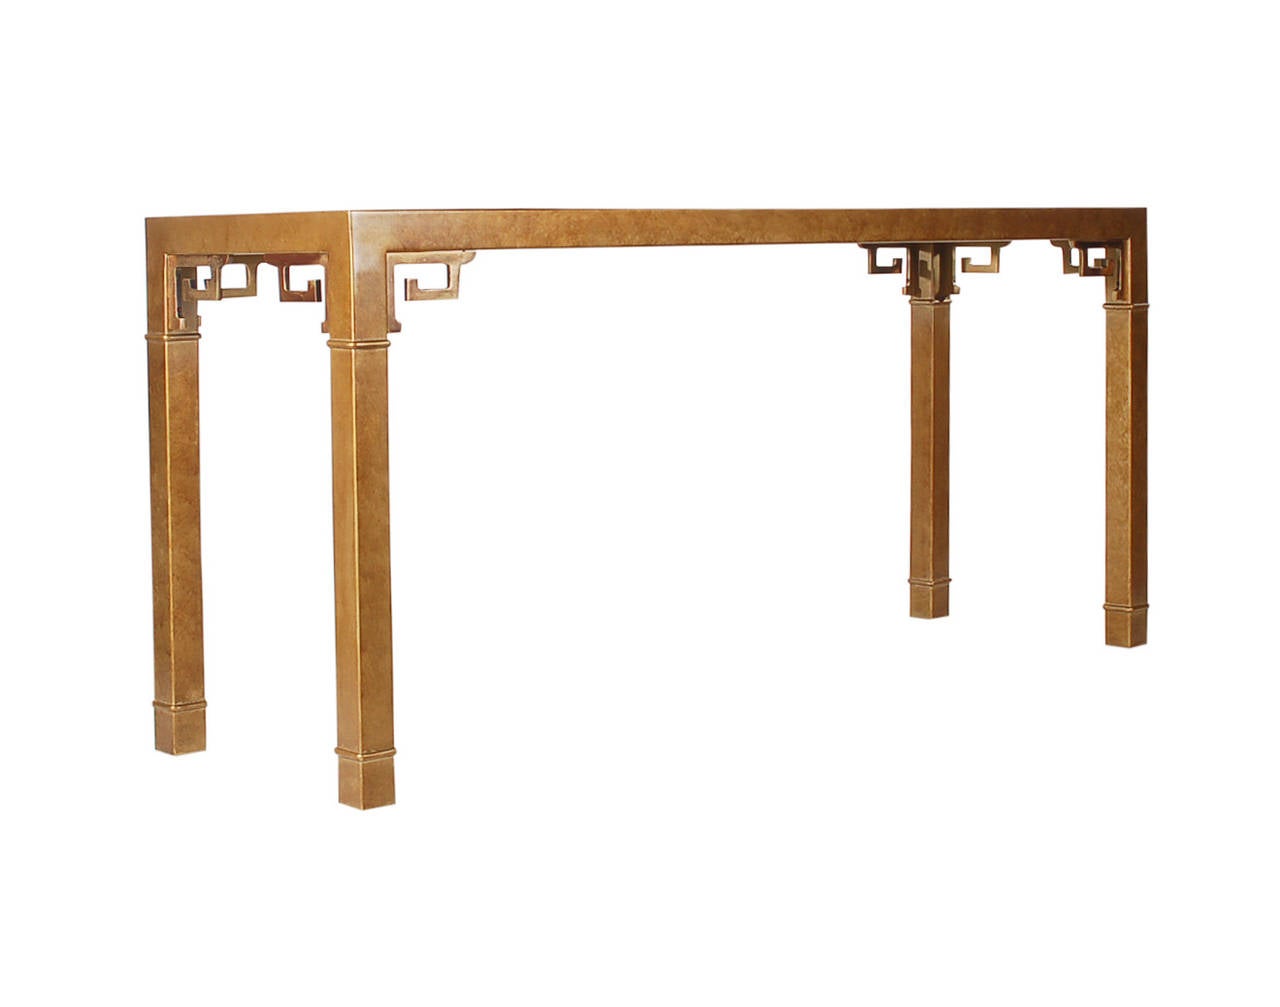 A very well made Asian inspired console table made by Mastercraft. It features brass frame with a speckled mirror inlay.